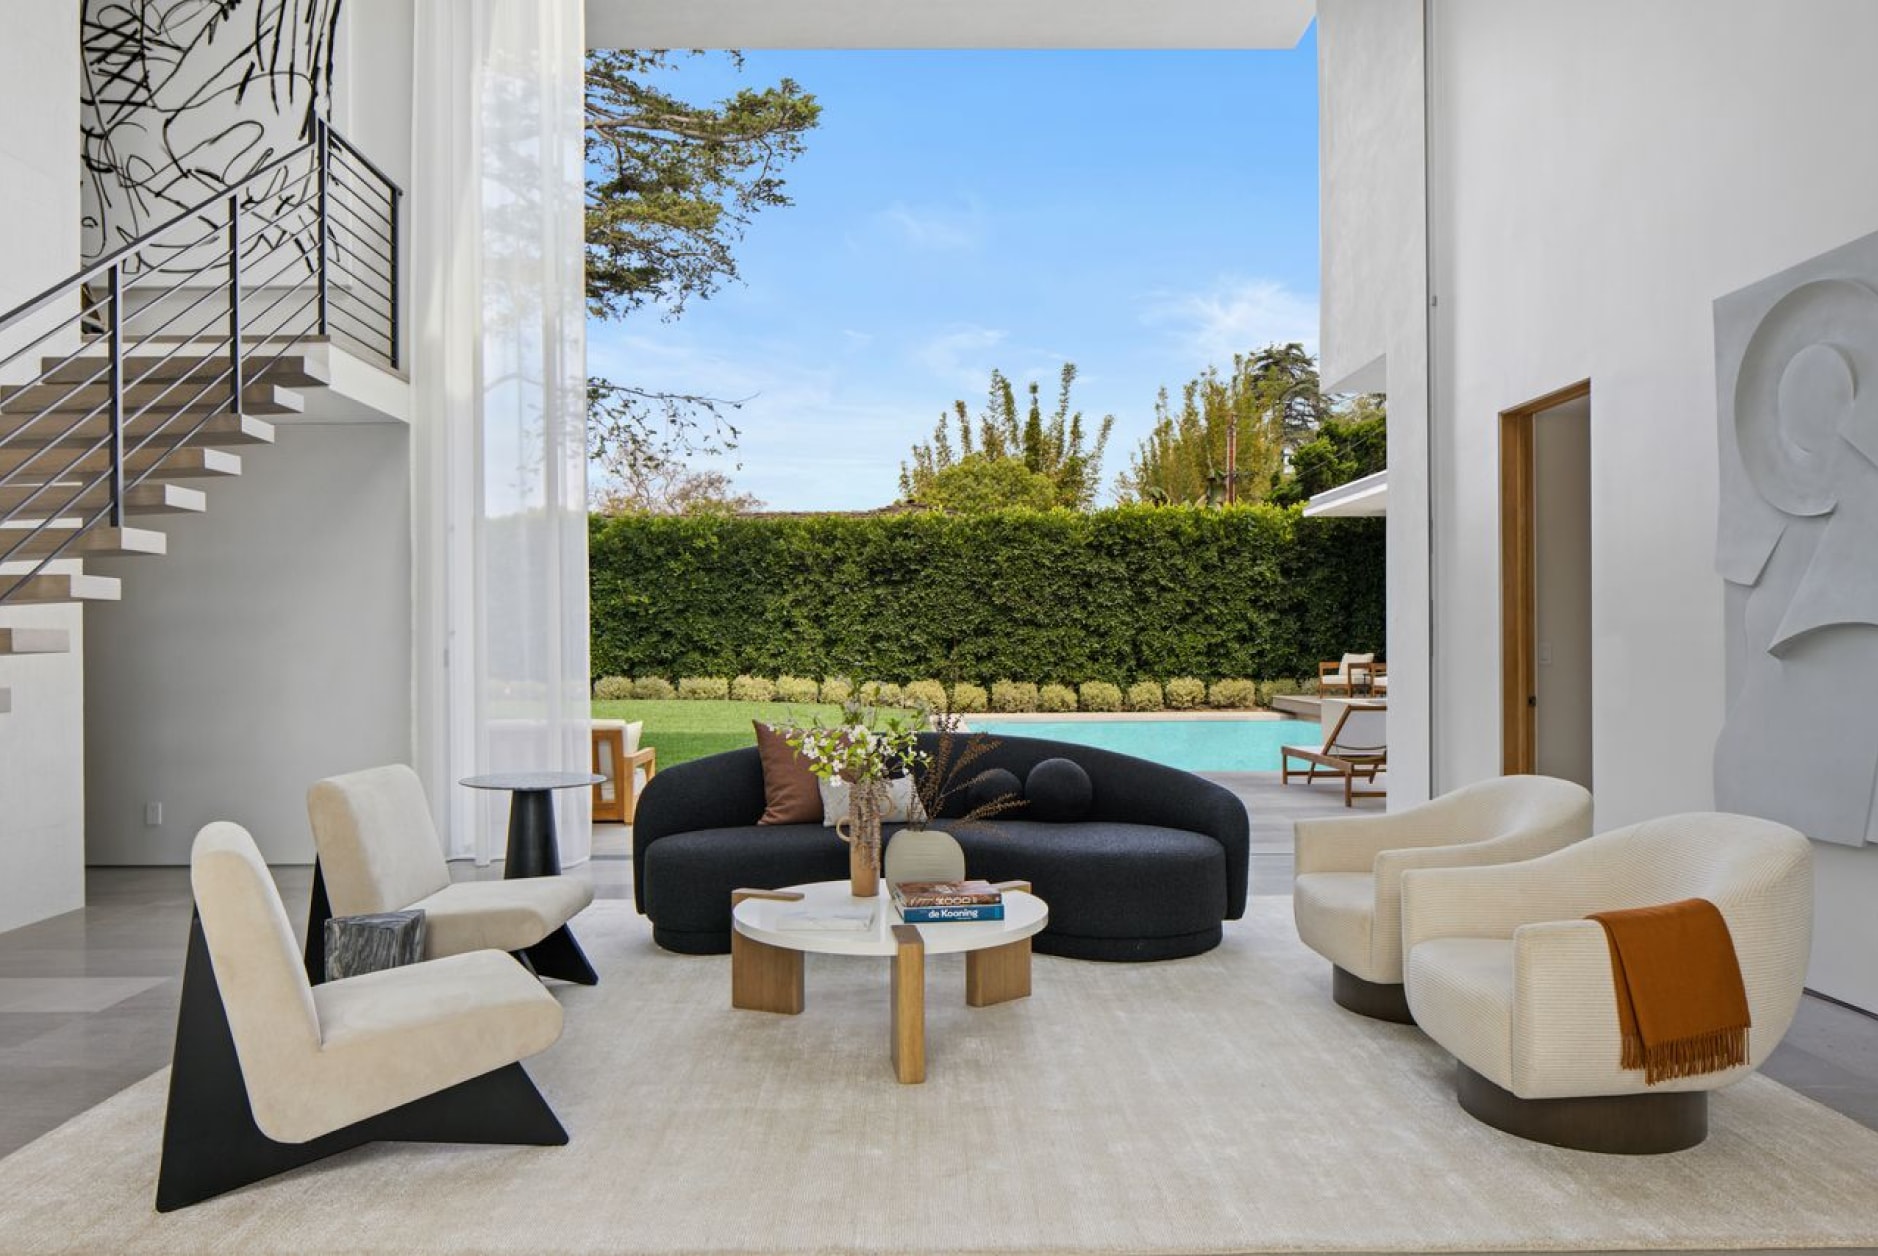 In a luxurious living room, a black couch is accompanied by four matching white chairs on a white rug. The back wall opens to a backyard with a clear blue pool, manicured grass, and a seamless hedge enclosure.